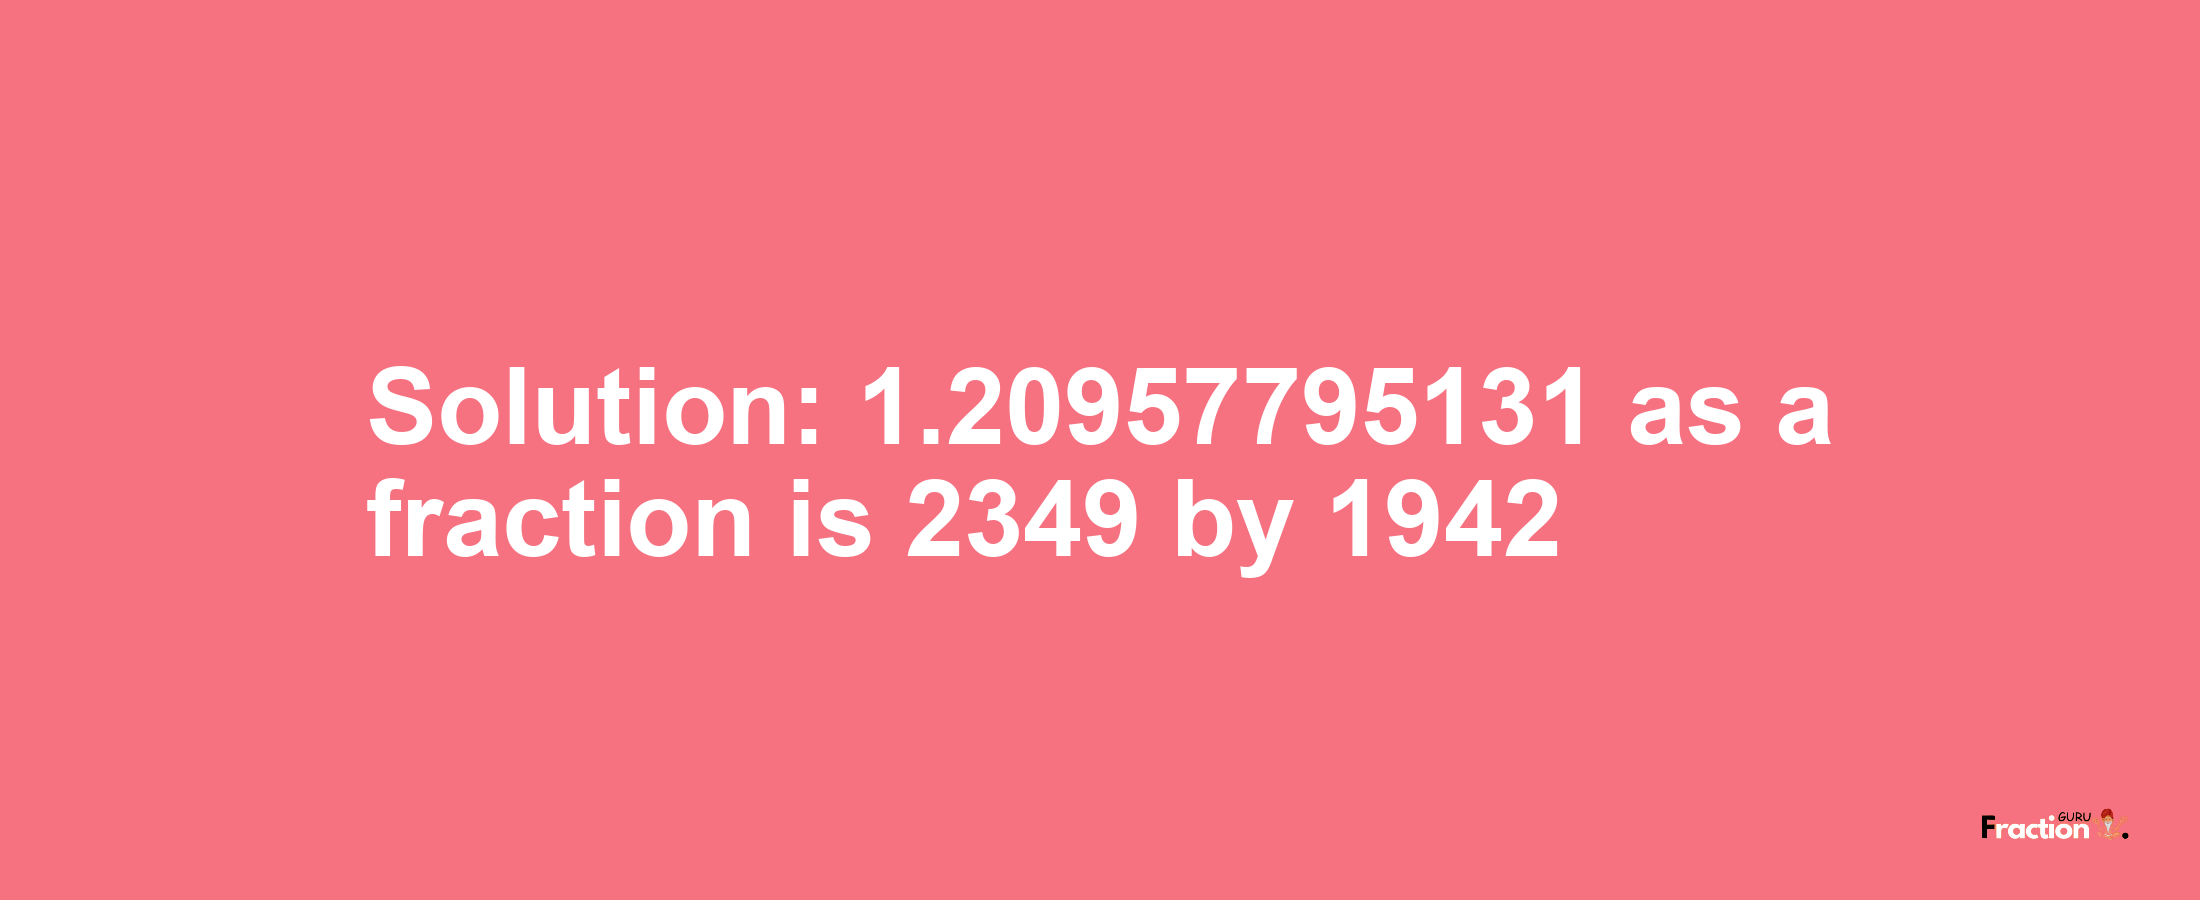 Solution:1.20957795131 as a fraction is 2349/1942